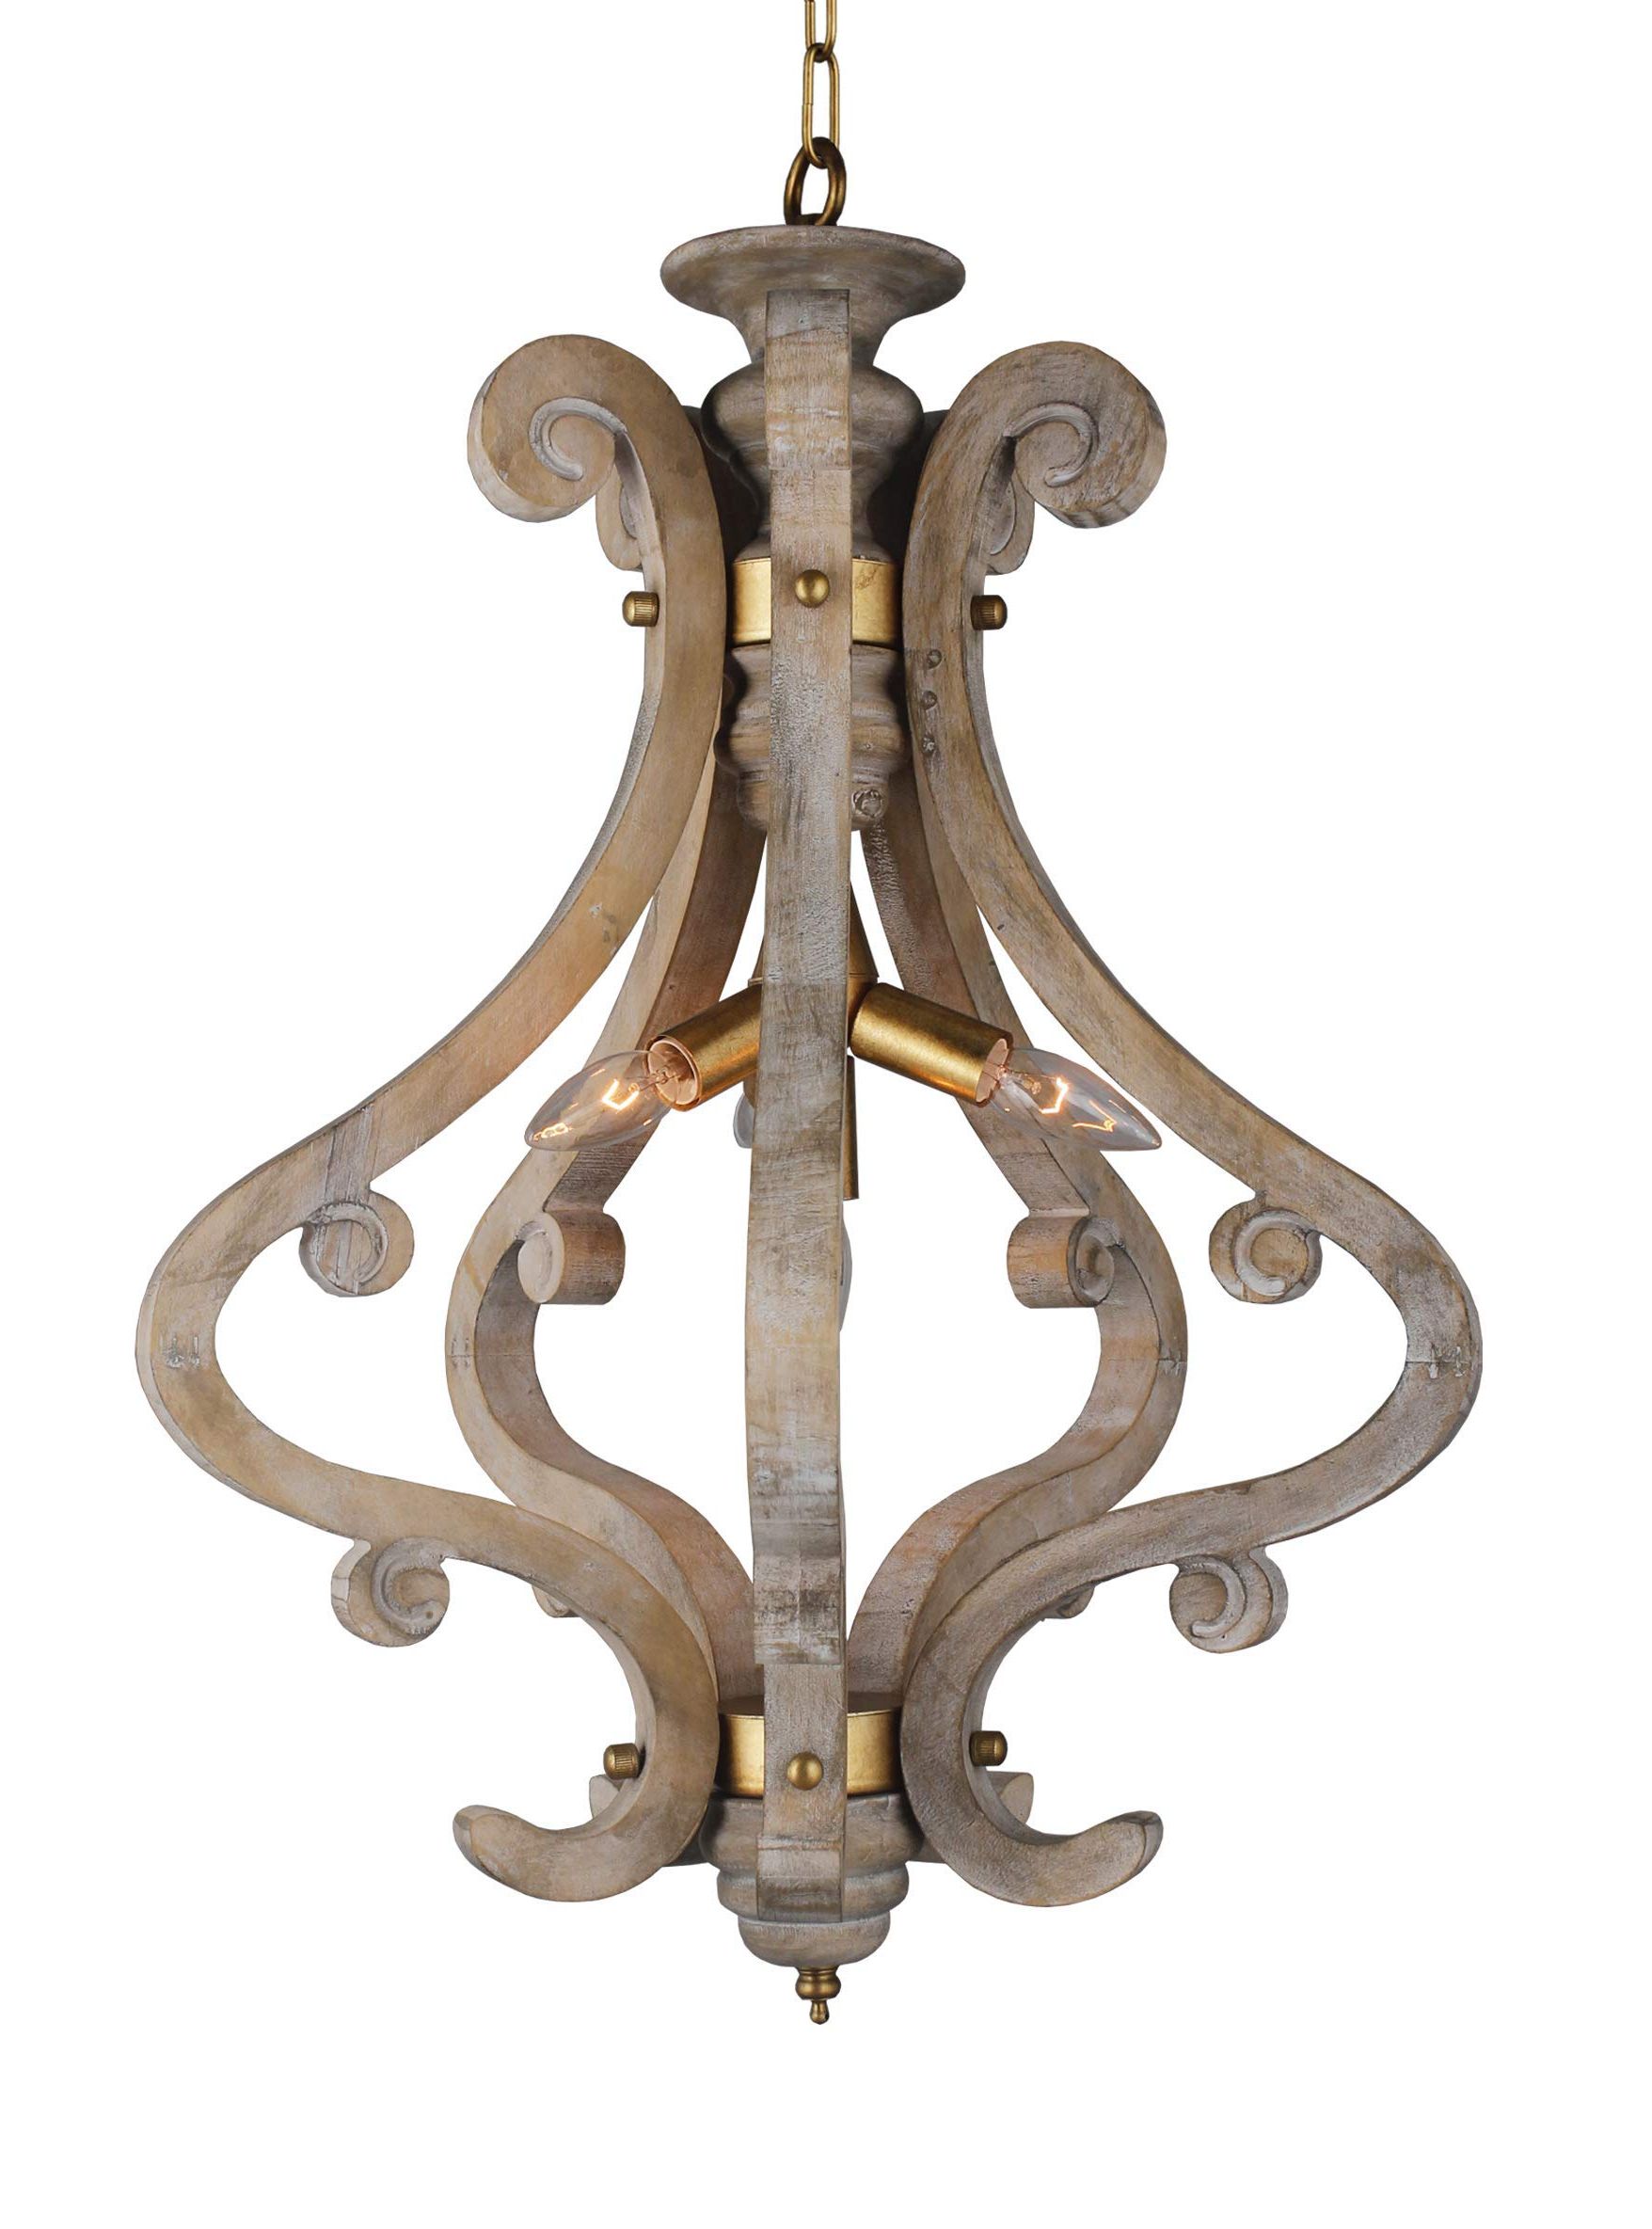 Well Known 4 Light X 20" Wide Charming Wood French Country Lantern Foyer Pendant Lamp  Gold Finish Farmhouse Rustic Style Wood Metal Chandelier – – Amazon For County French Iron Lantern Chandeliers (View 9 of 10)